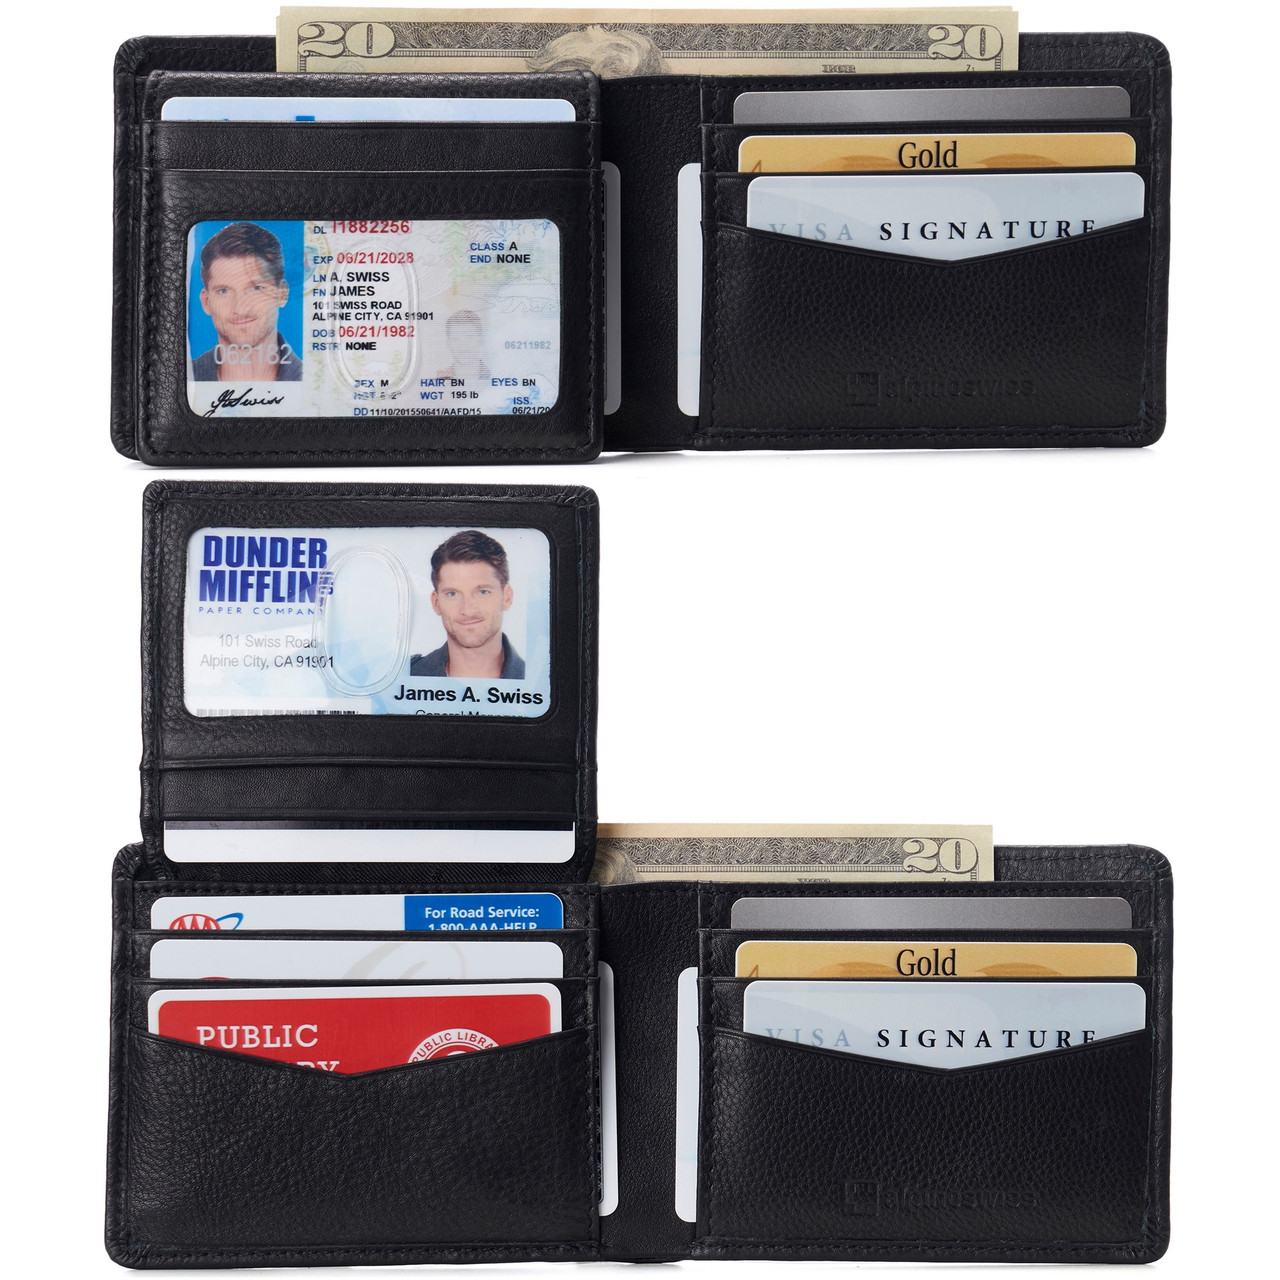 Zip Card Holder, Leather & Paper Gifts